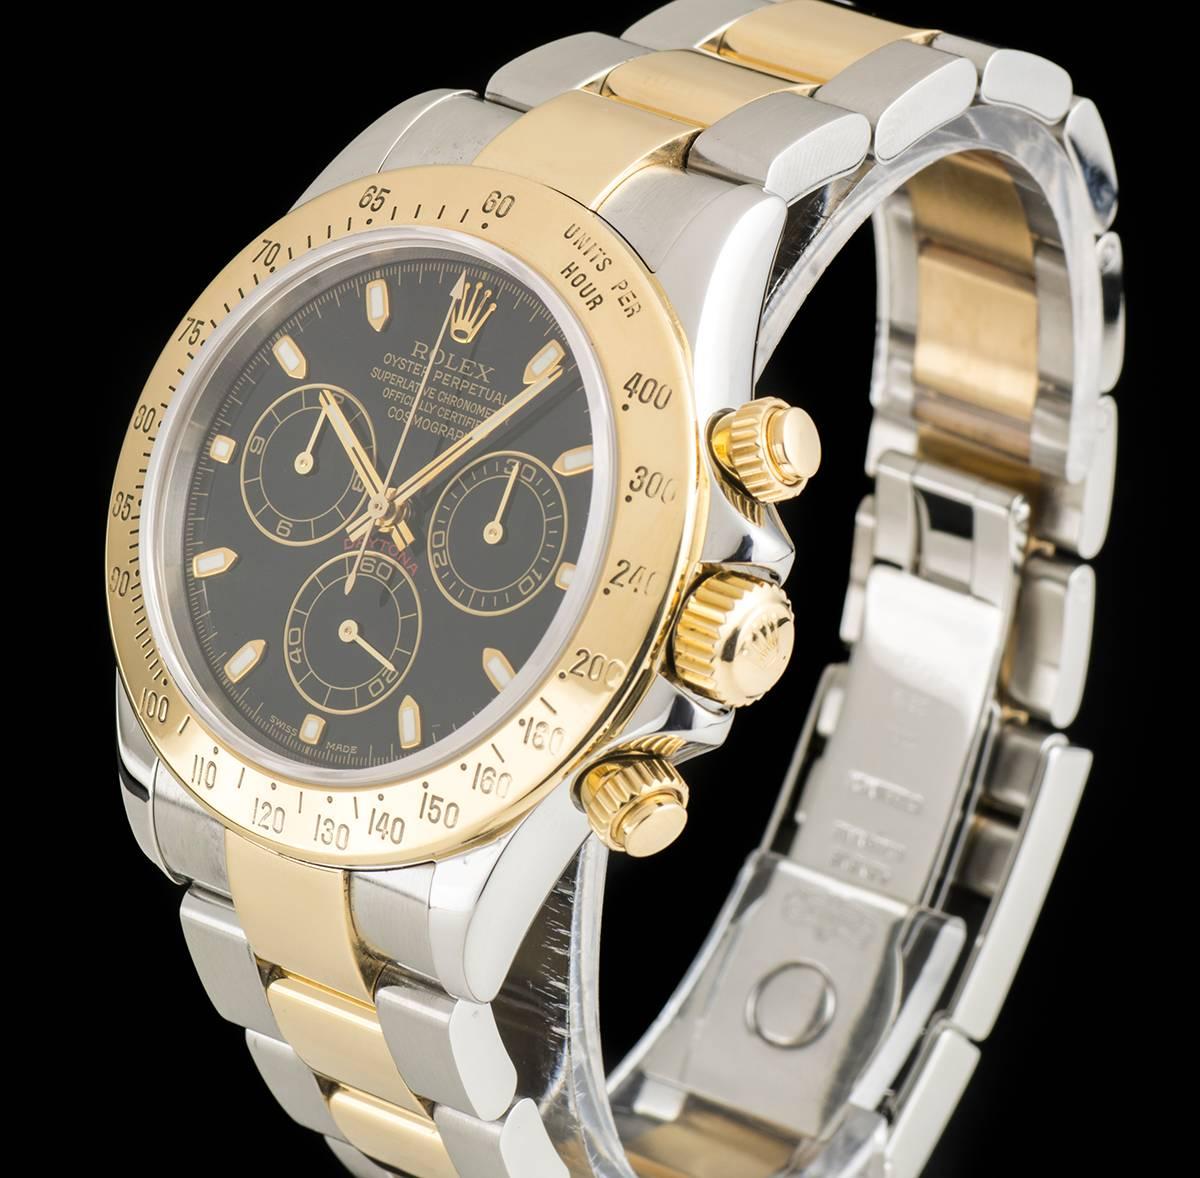 A Stainless Steel and 18k Yellow Gold Oyster Perpetual Cosmograph Daytona Gents Wristwatch, black dial with applied hour markers, 30 minute recorder at 3 0'clock, small seconds dial at 6 0'clock, 12 hour recorder at 9 0'clock, a fixed 18k yellow